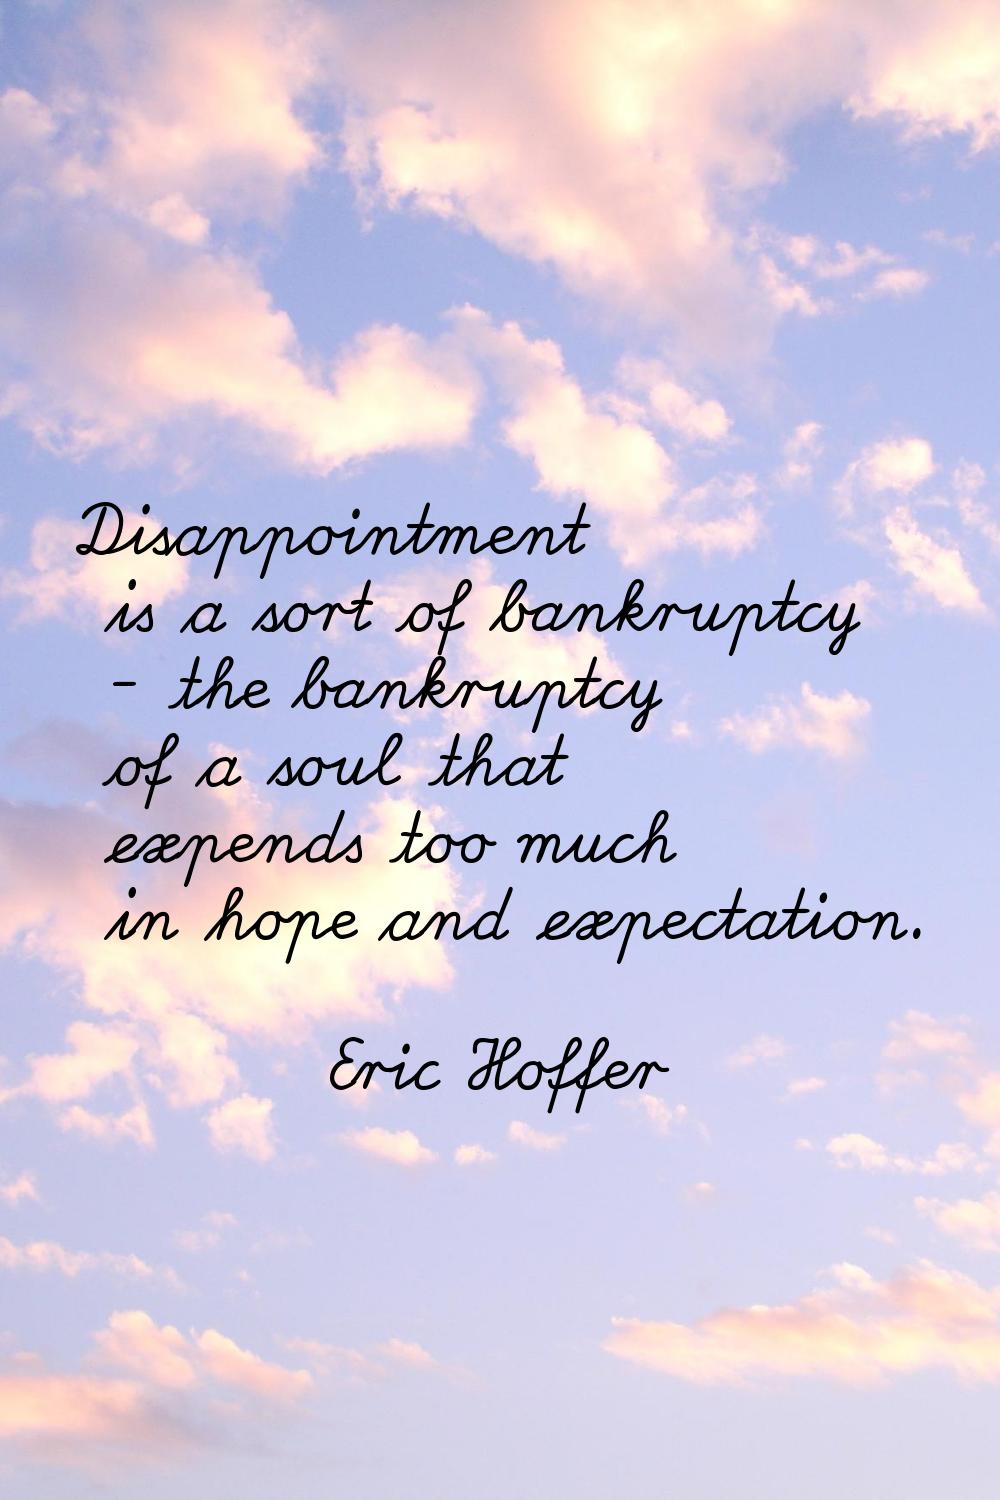 Disappointment is a sort of bankruptcy - the bankruptcy of a soul that expends too much in hope and